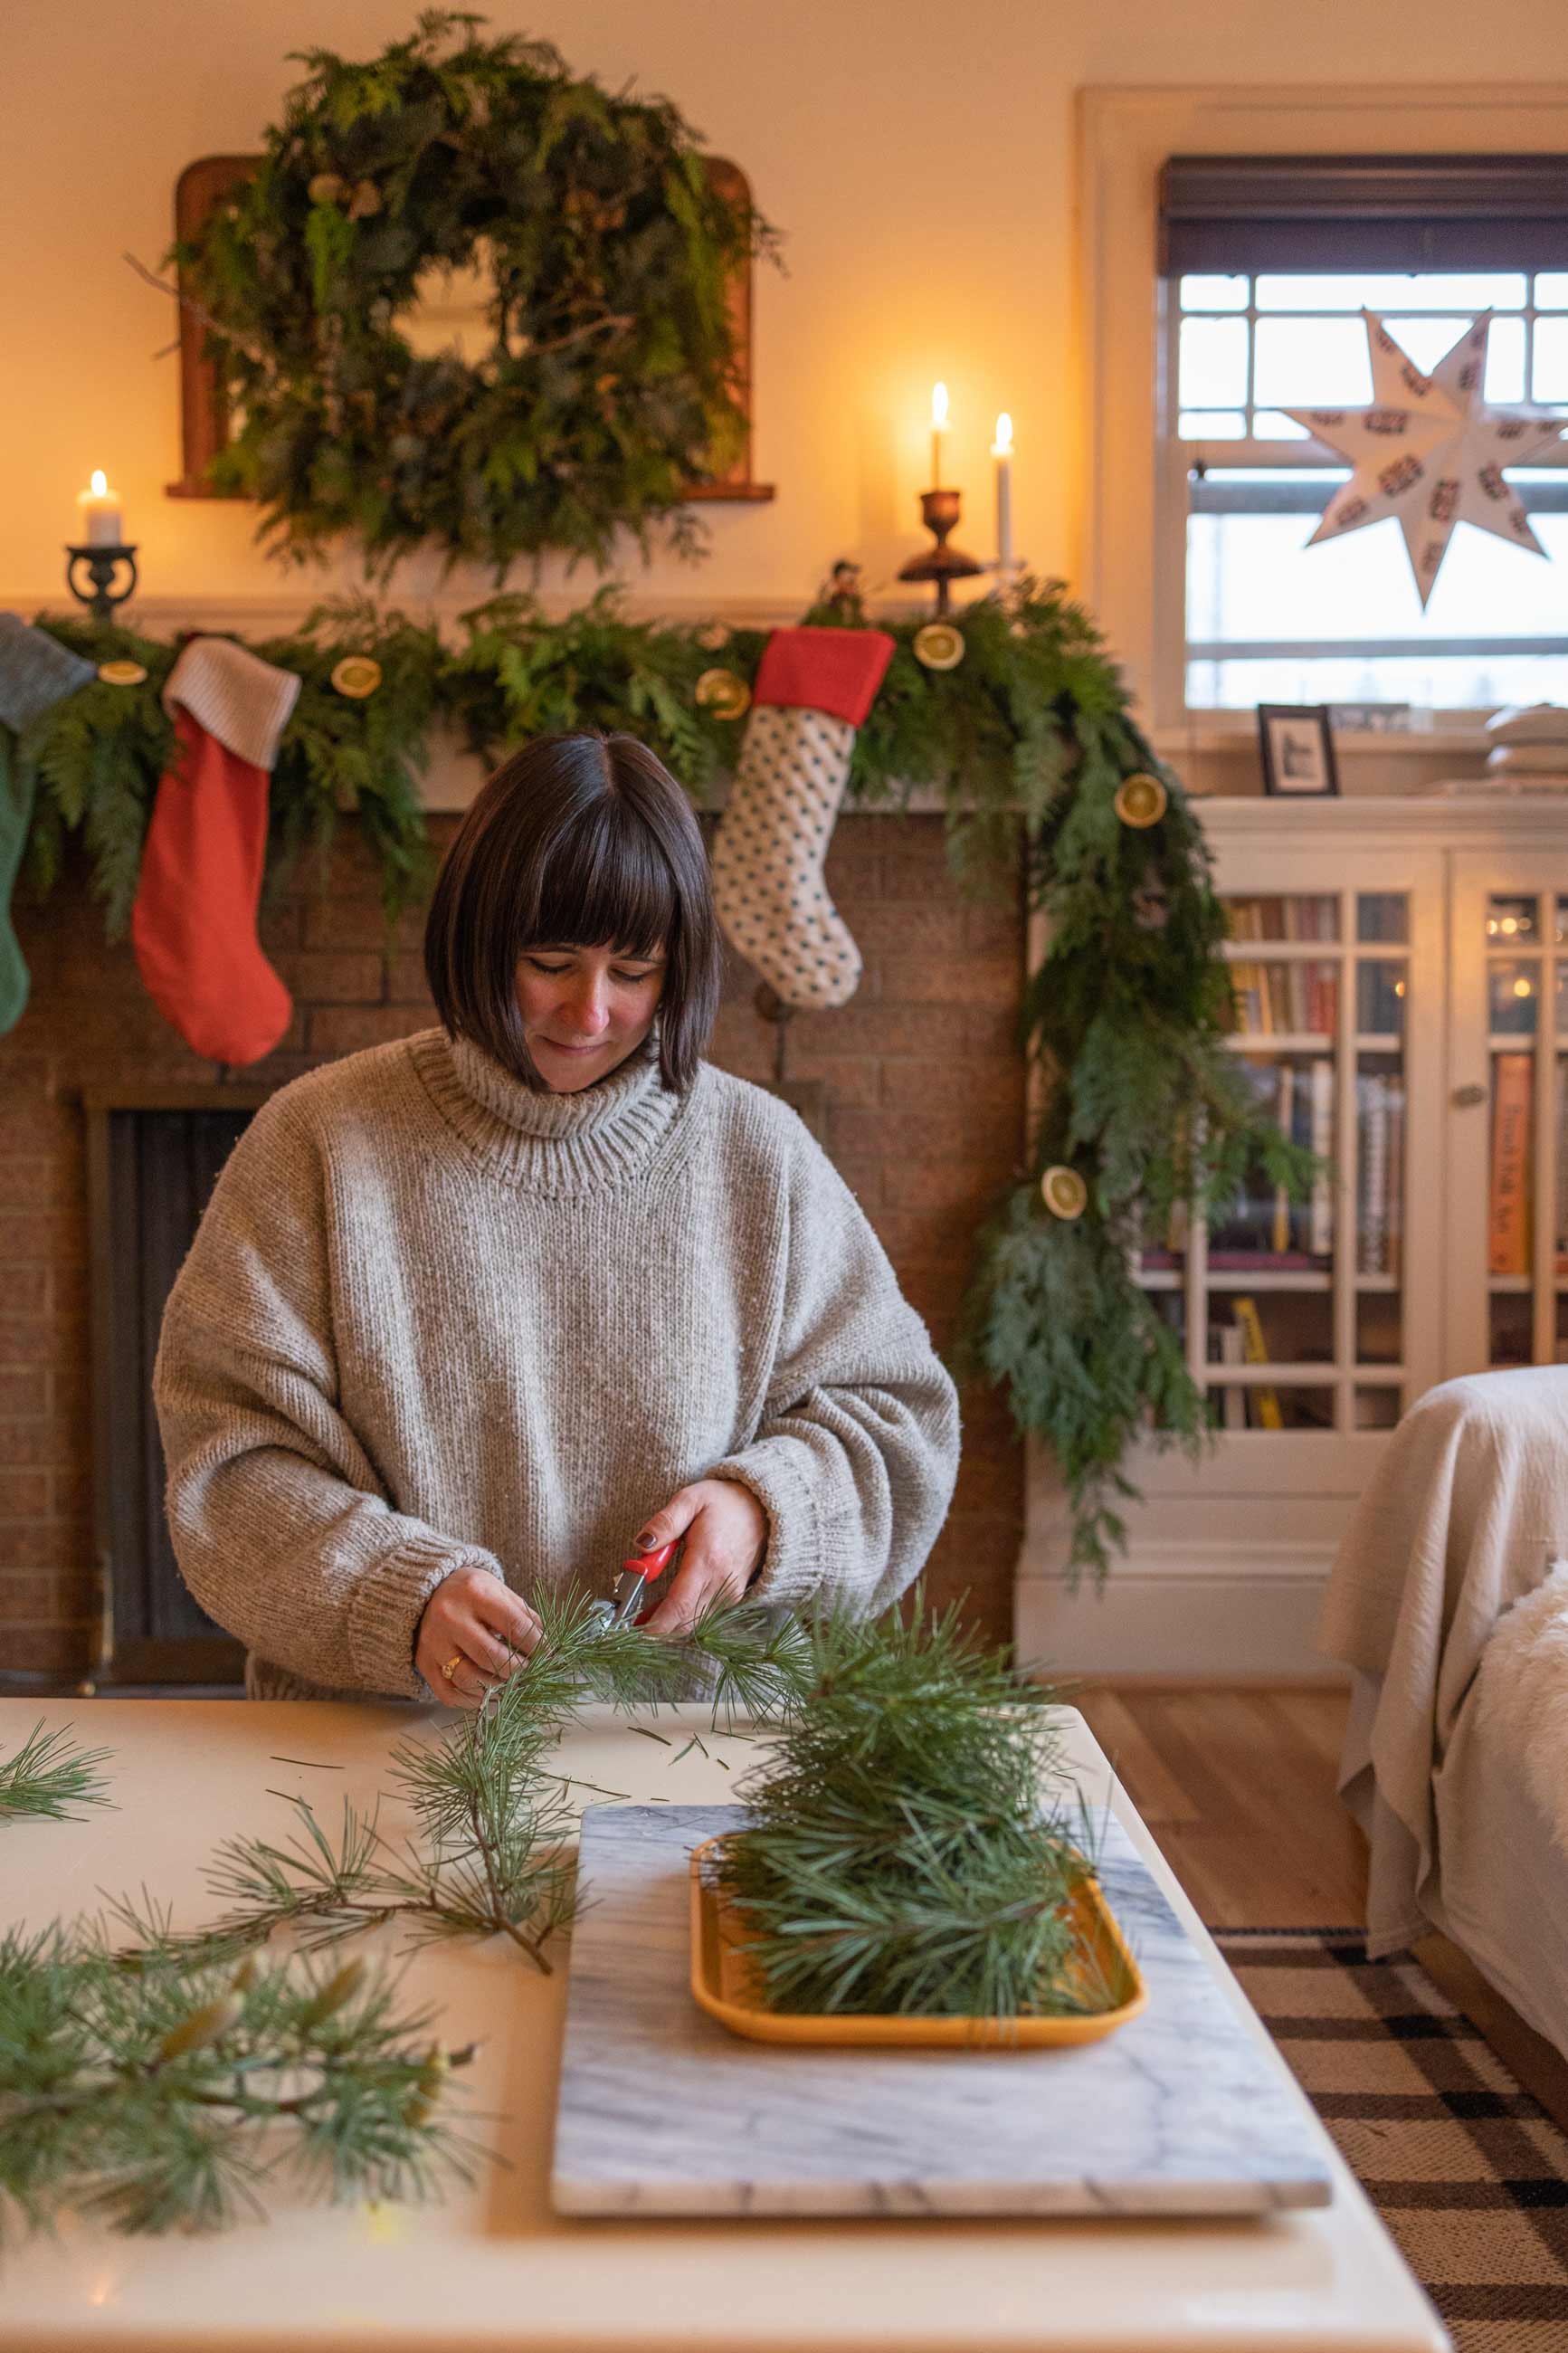 Person making garland on coffee table in front of cozy fireplace.